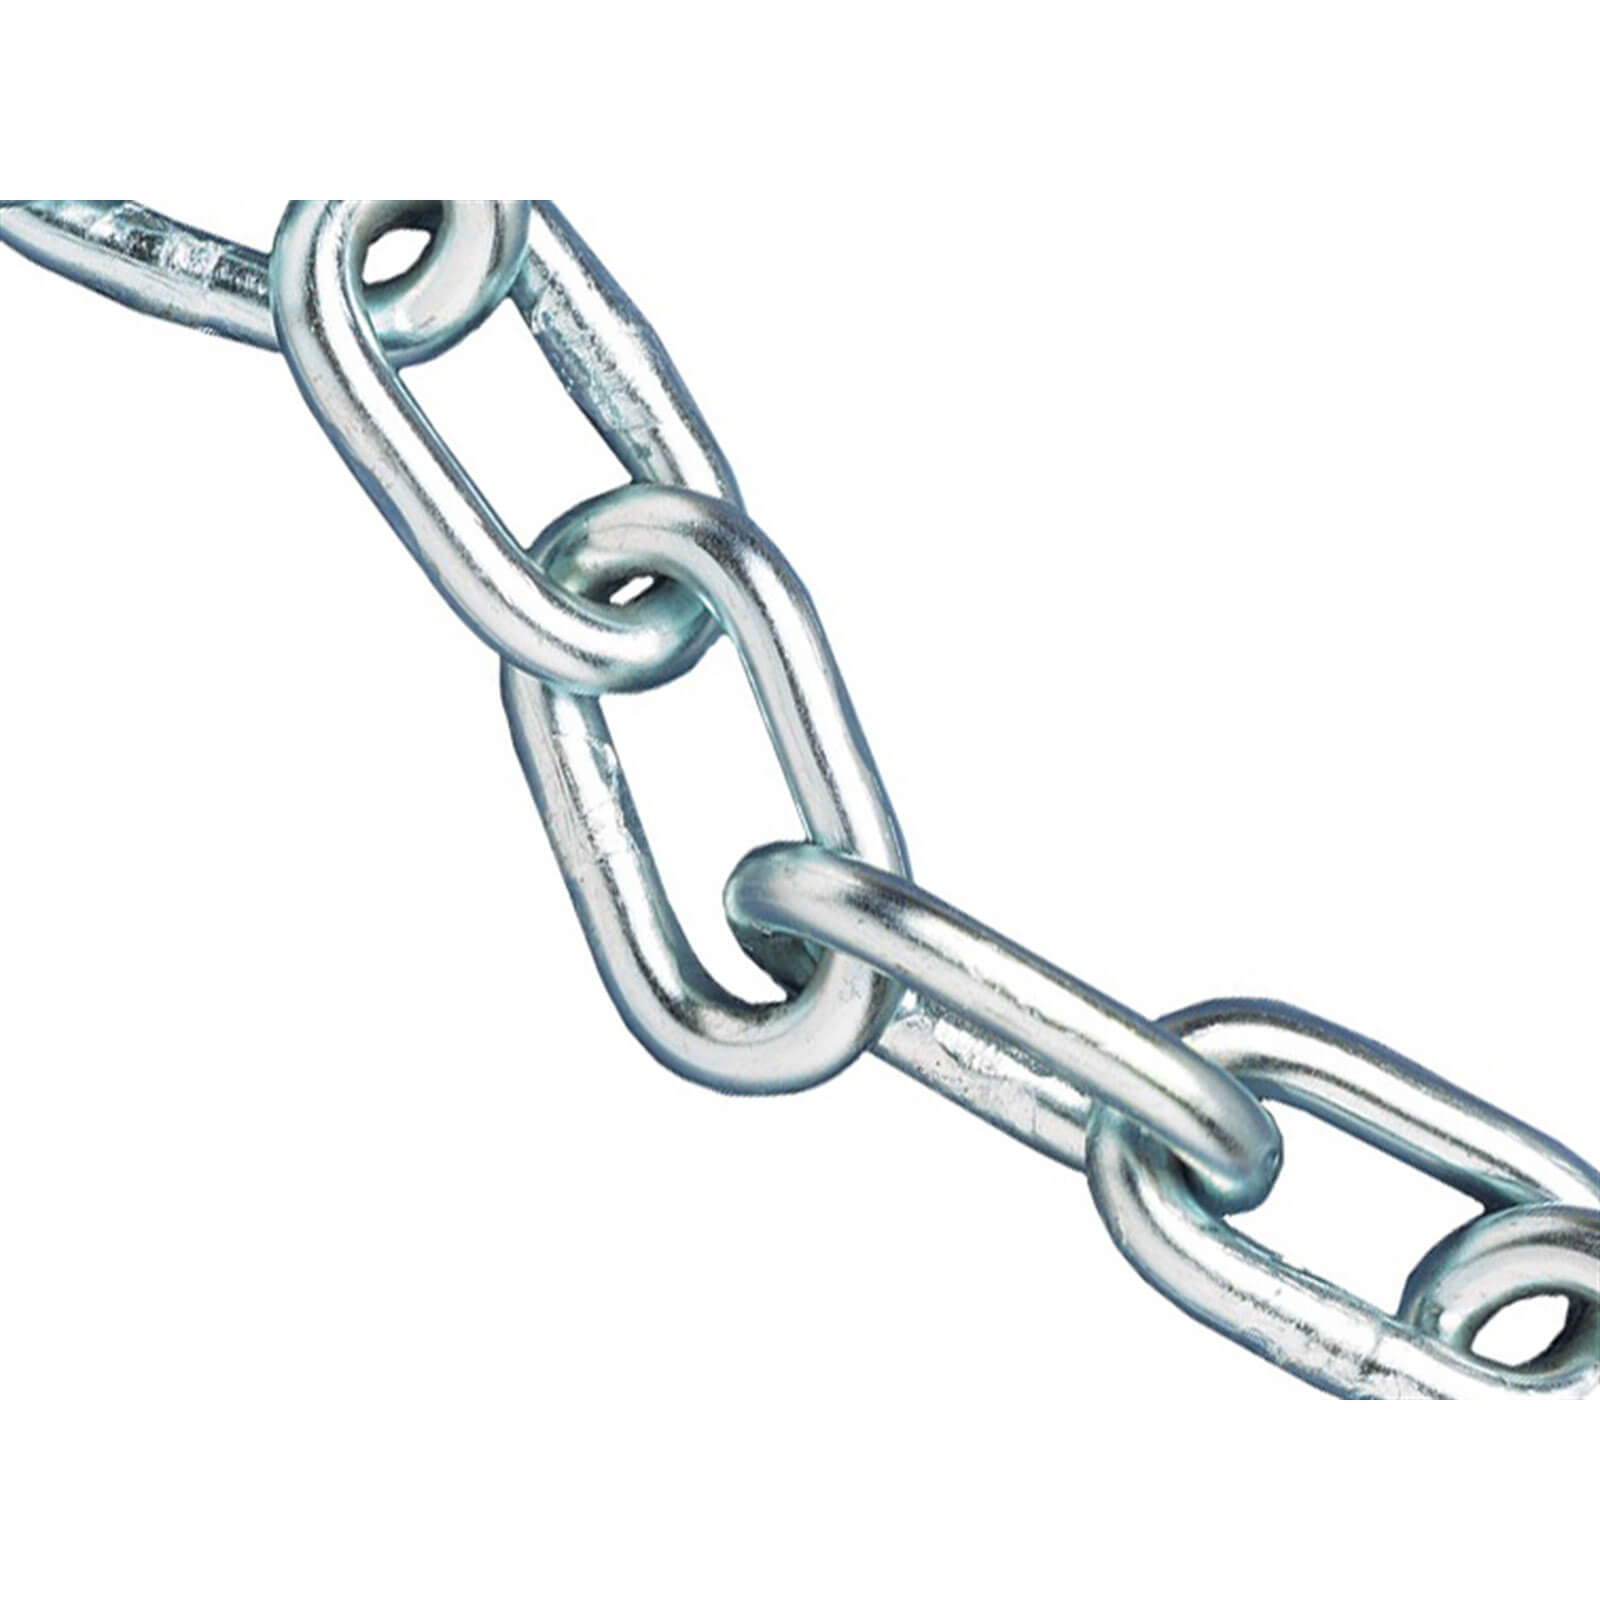 Image of Faithfull A Link Metal Zinc Plated Chain 4mm 30m